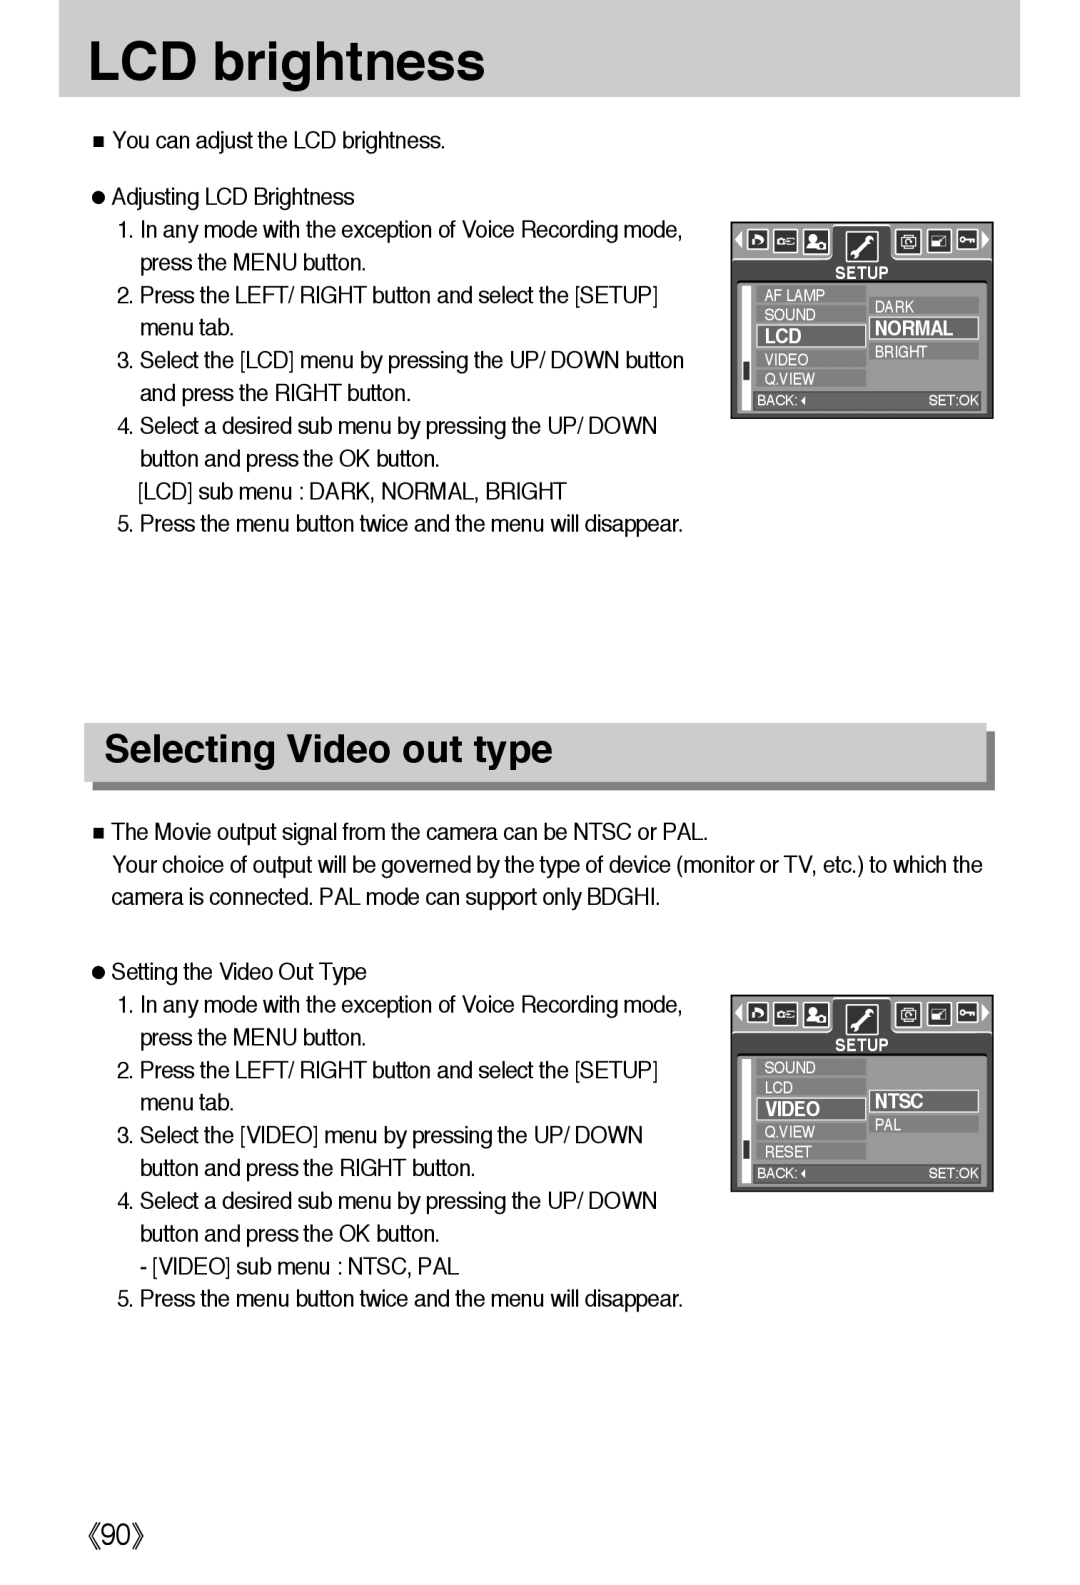 Samsung L50 user manual LCD brightness, Selecting Video out type, 《90》 